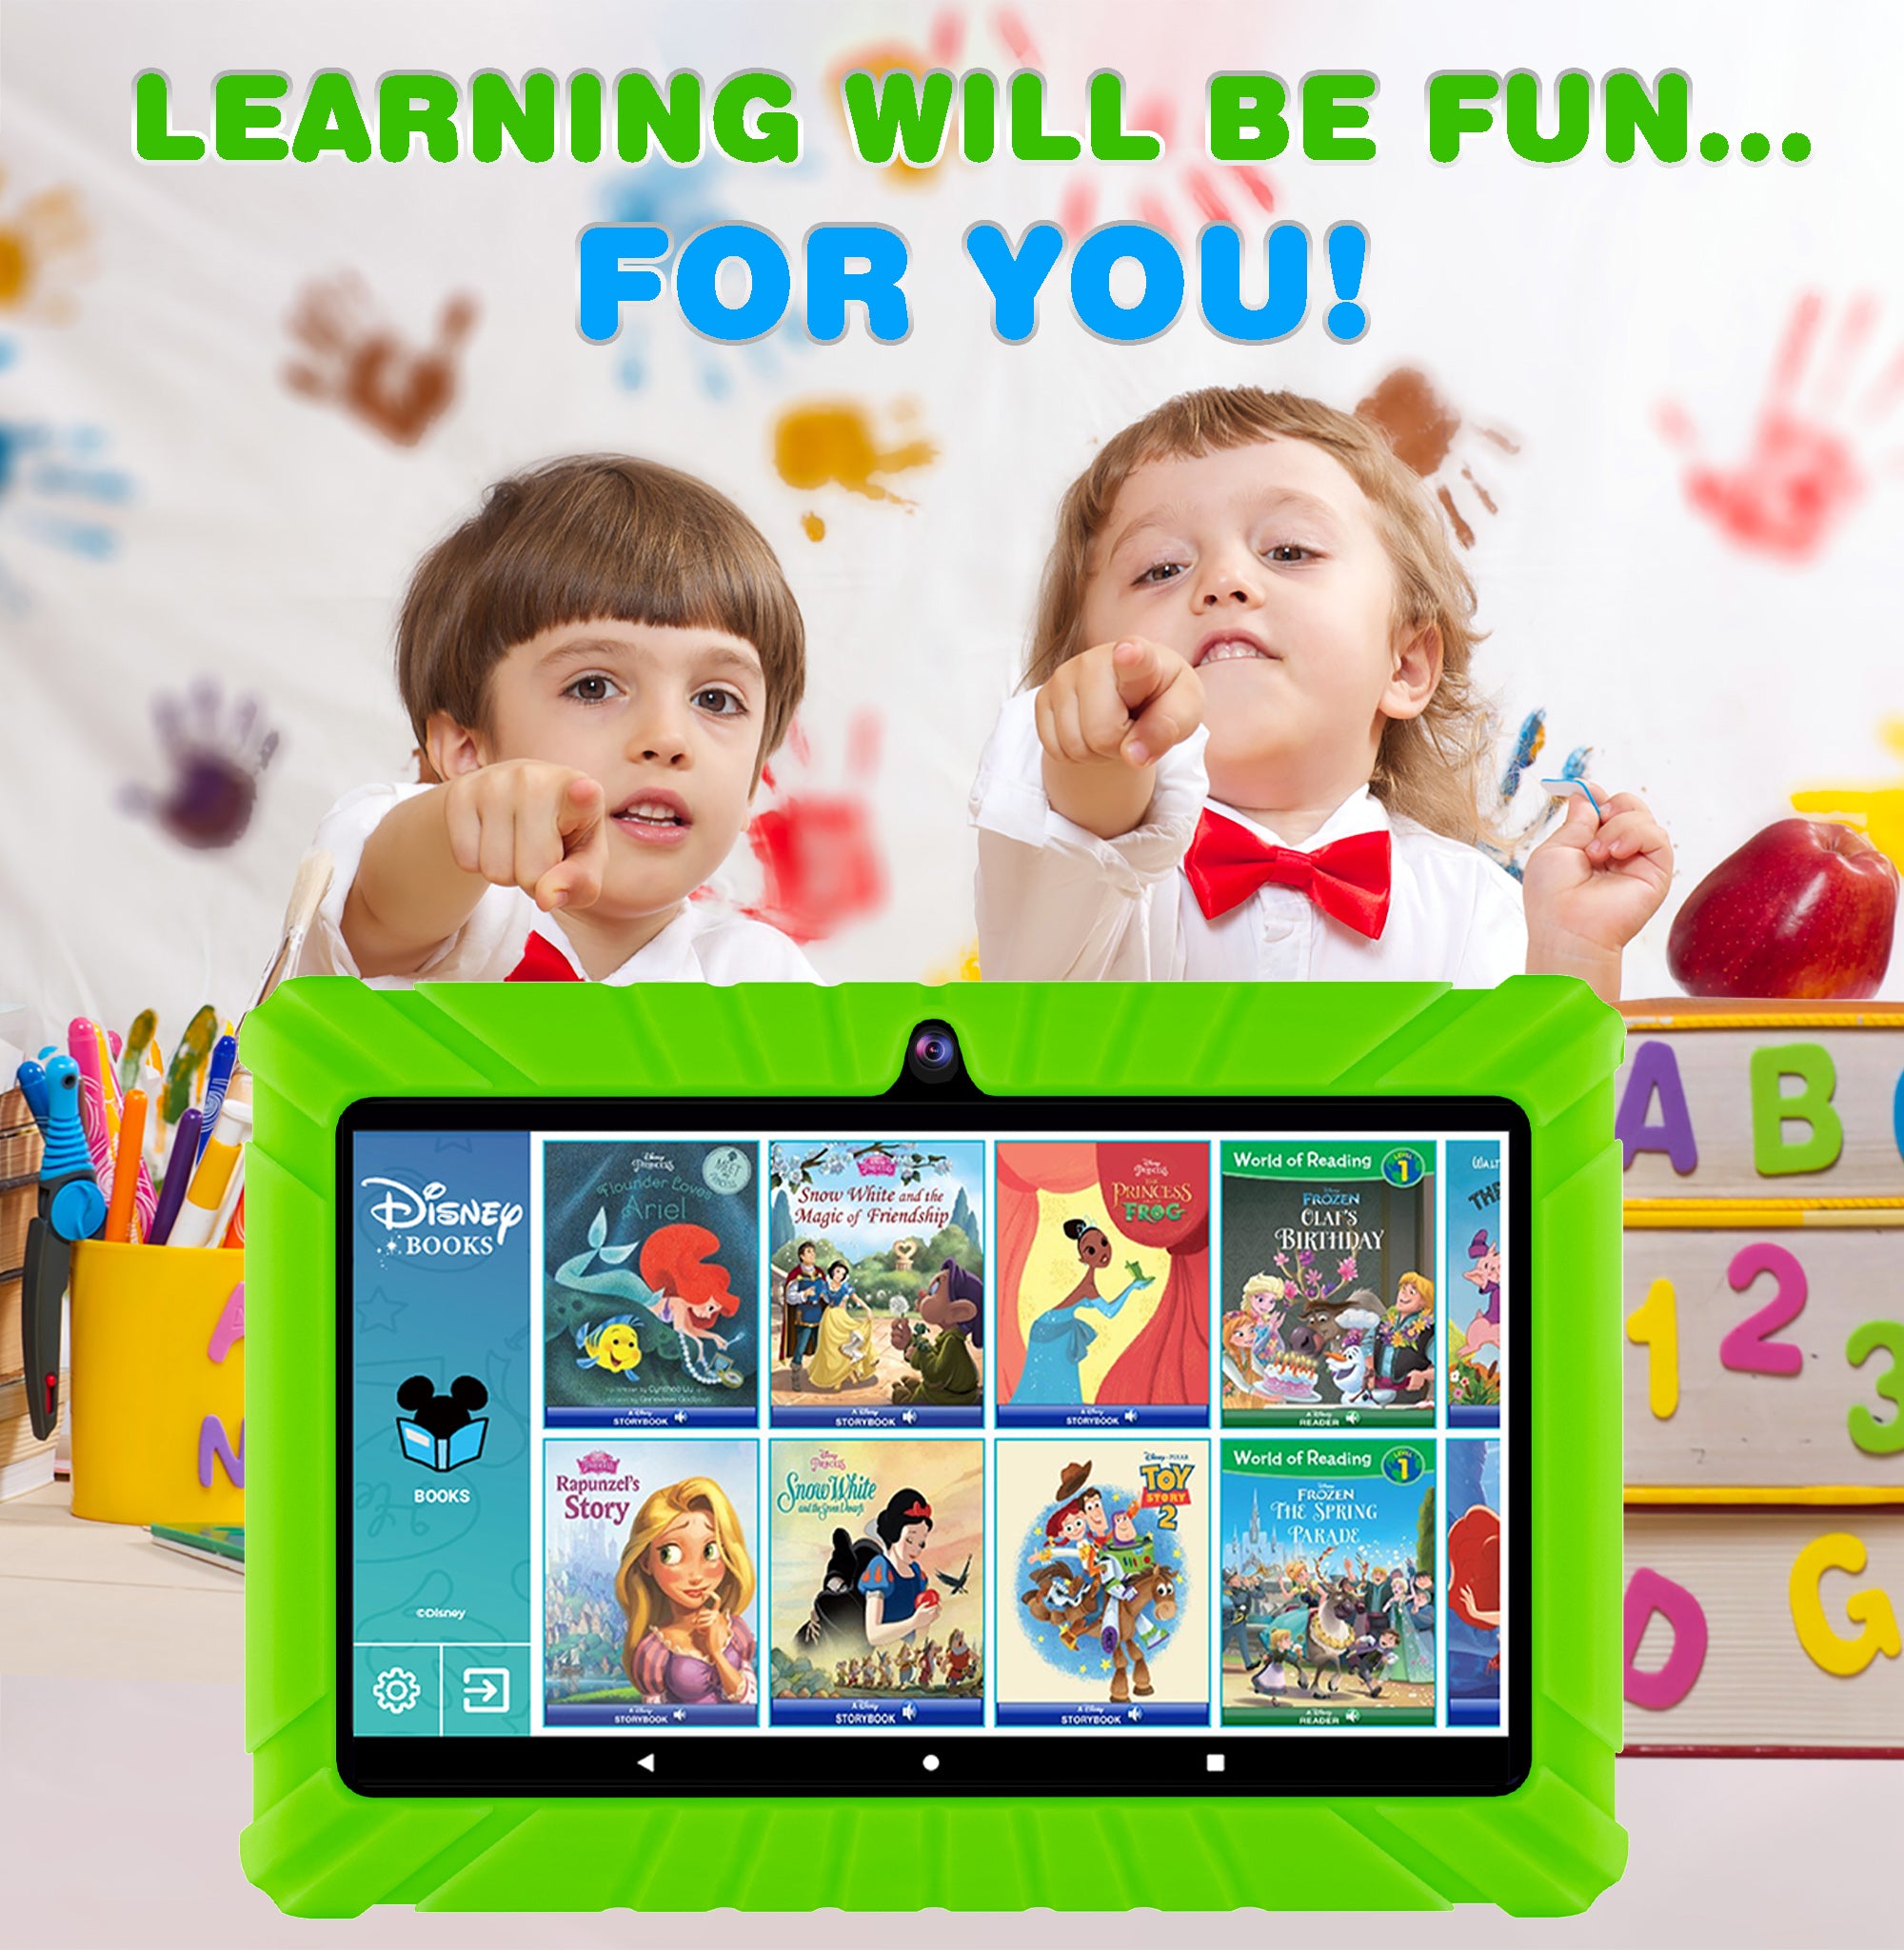 Contixo 7”V8-2 32GB Kids Tablet Featuring 50 Disney eBooks Ages 3-10